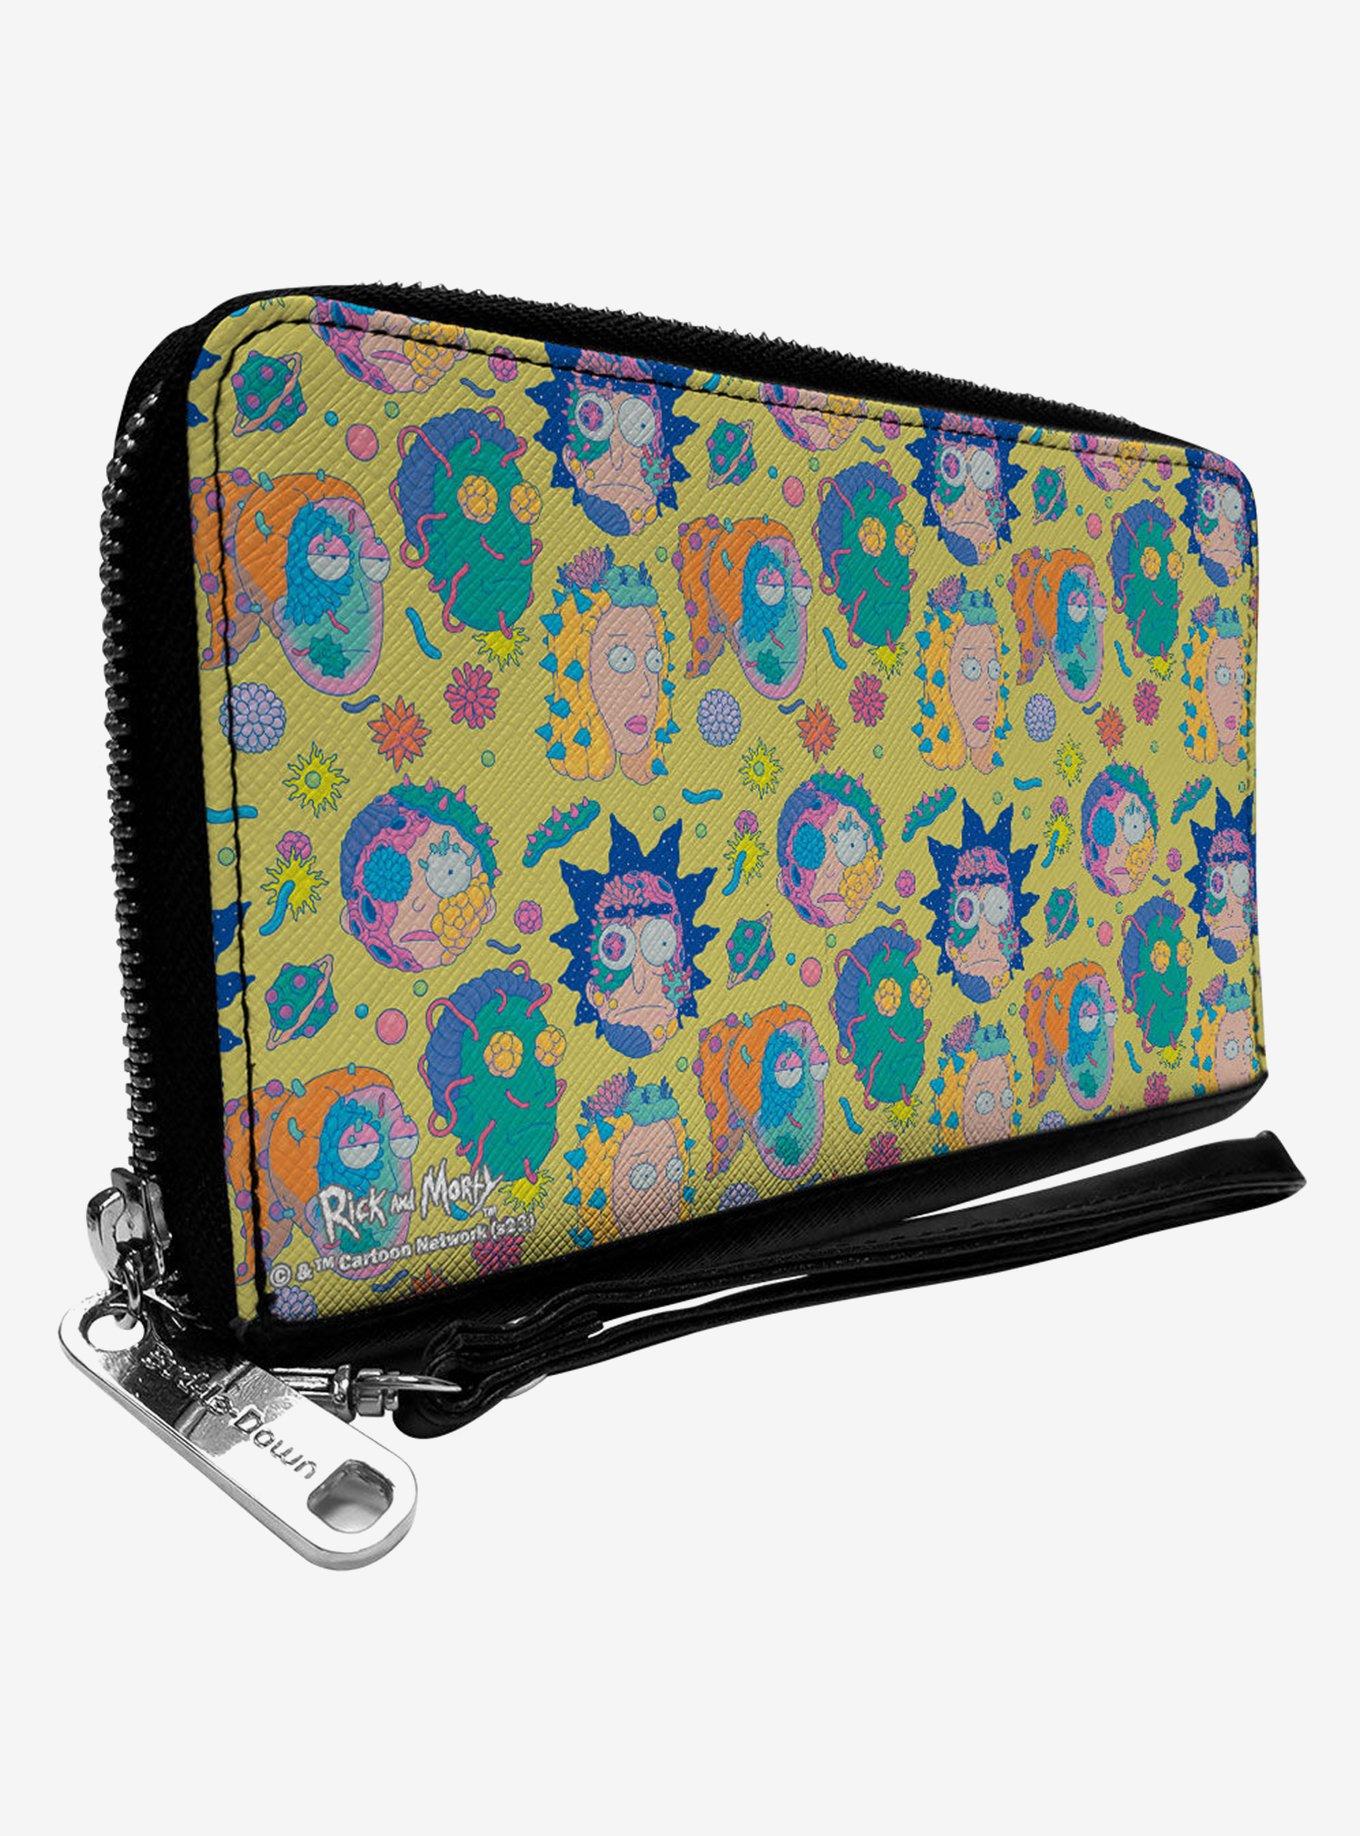 Rick and Morty Smith Family Faces and Cells Zip Around Wallet